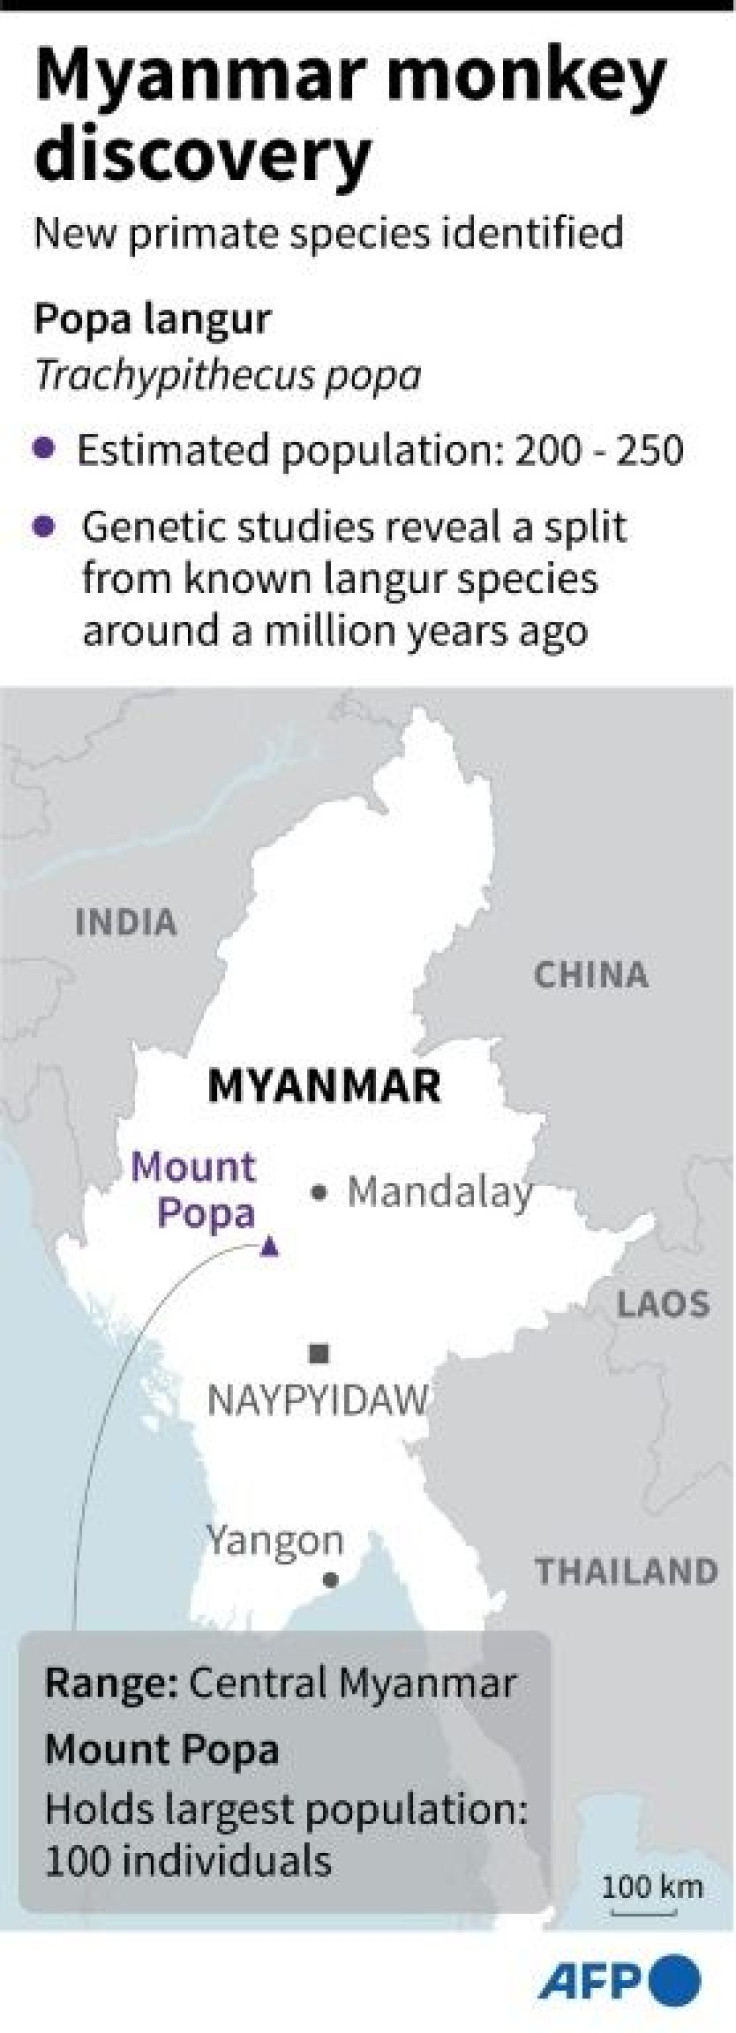 Map of Myanmar showing Mount Popa where a new species of monkey has been identified.